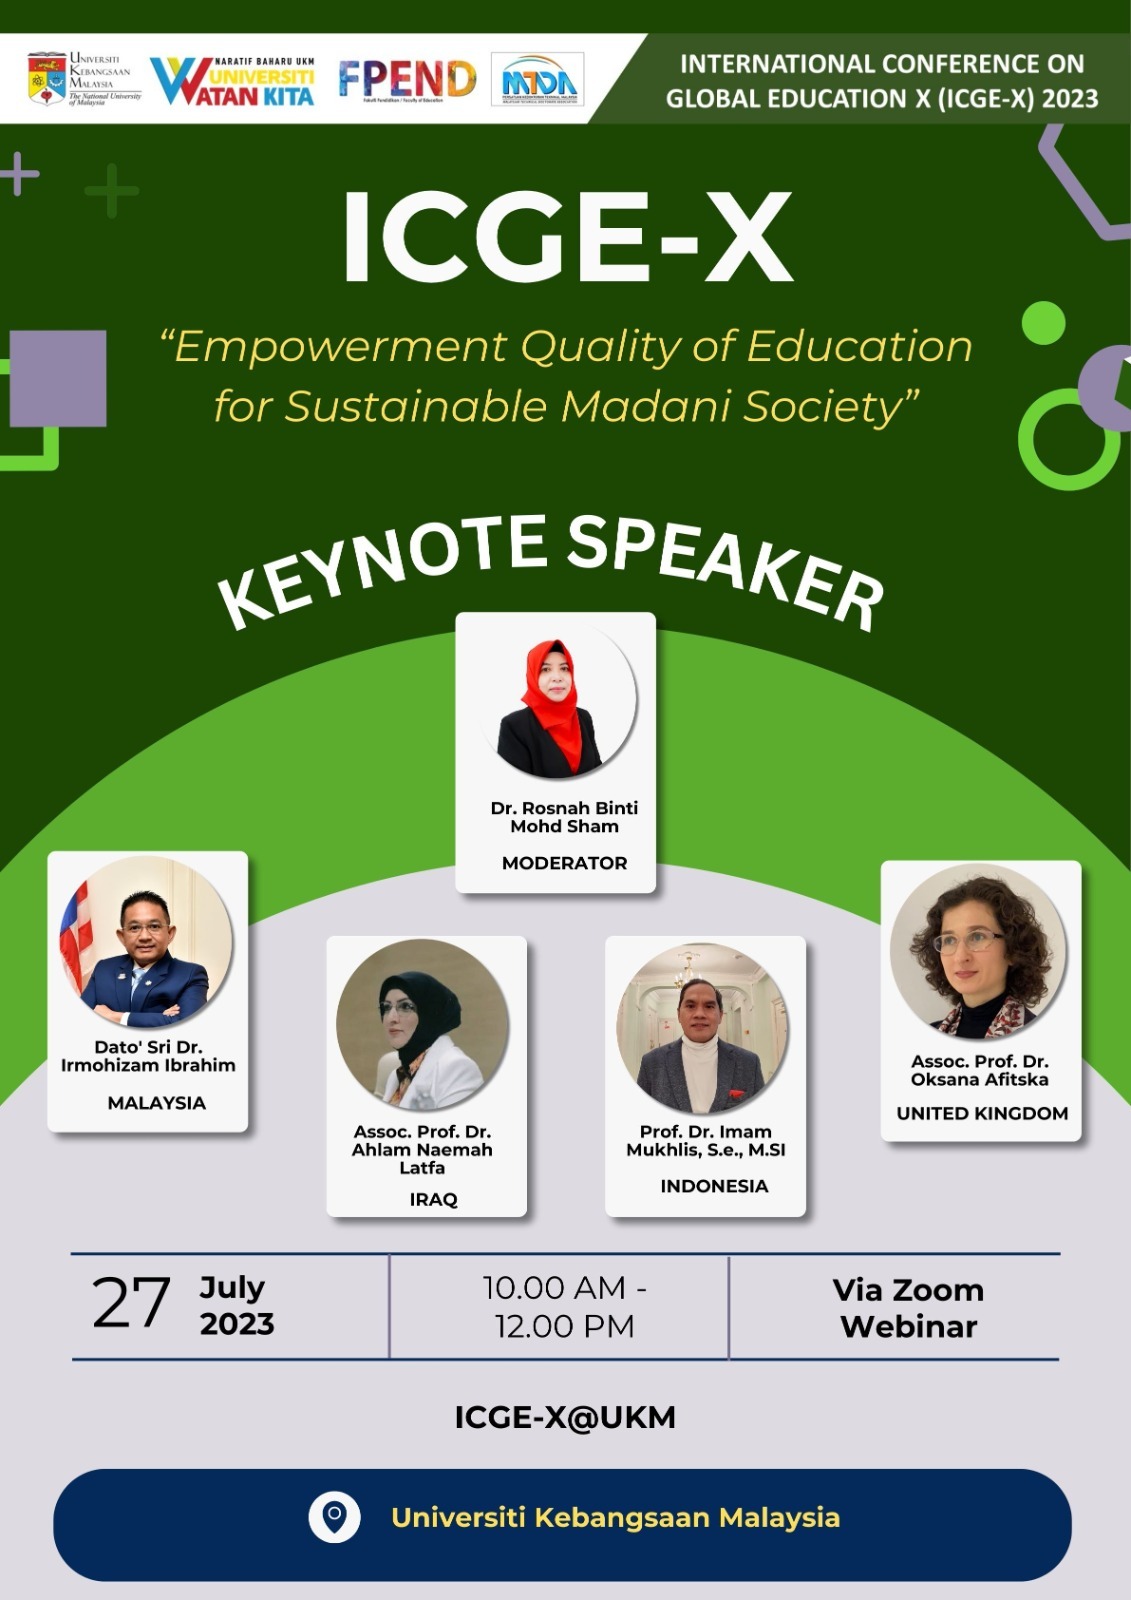 International Conference On Global Education X (ICGE-X) 2023